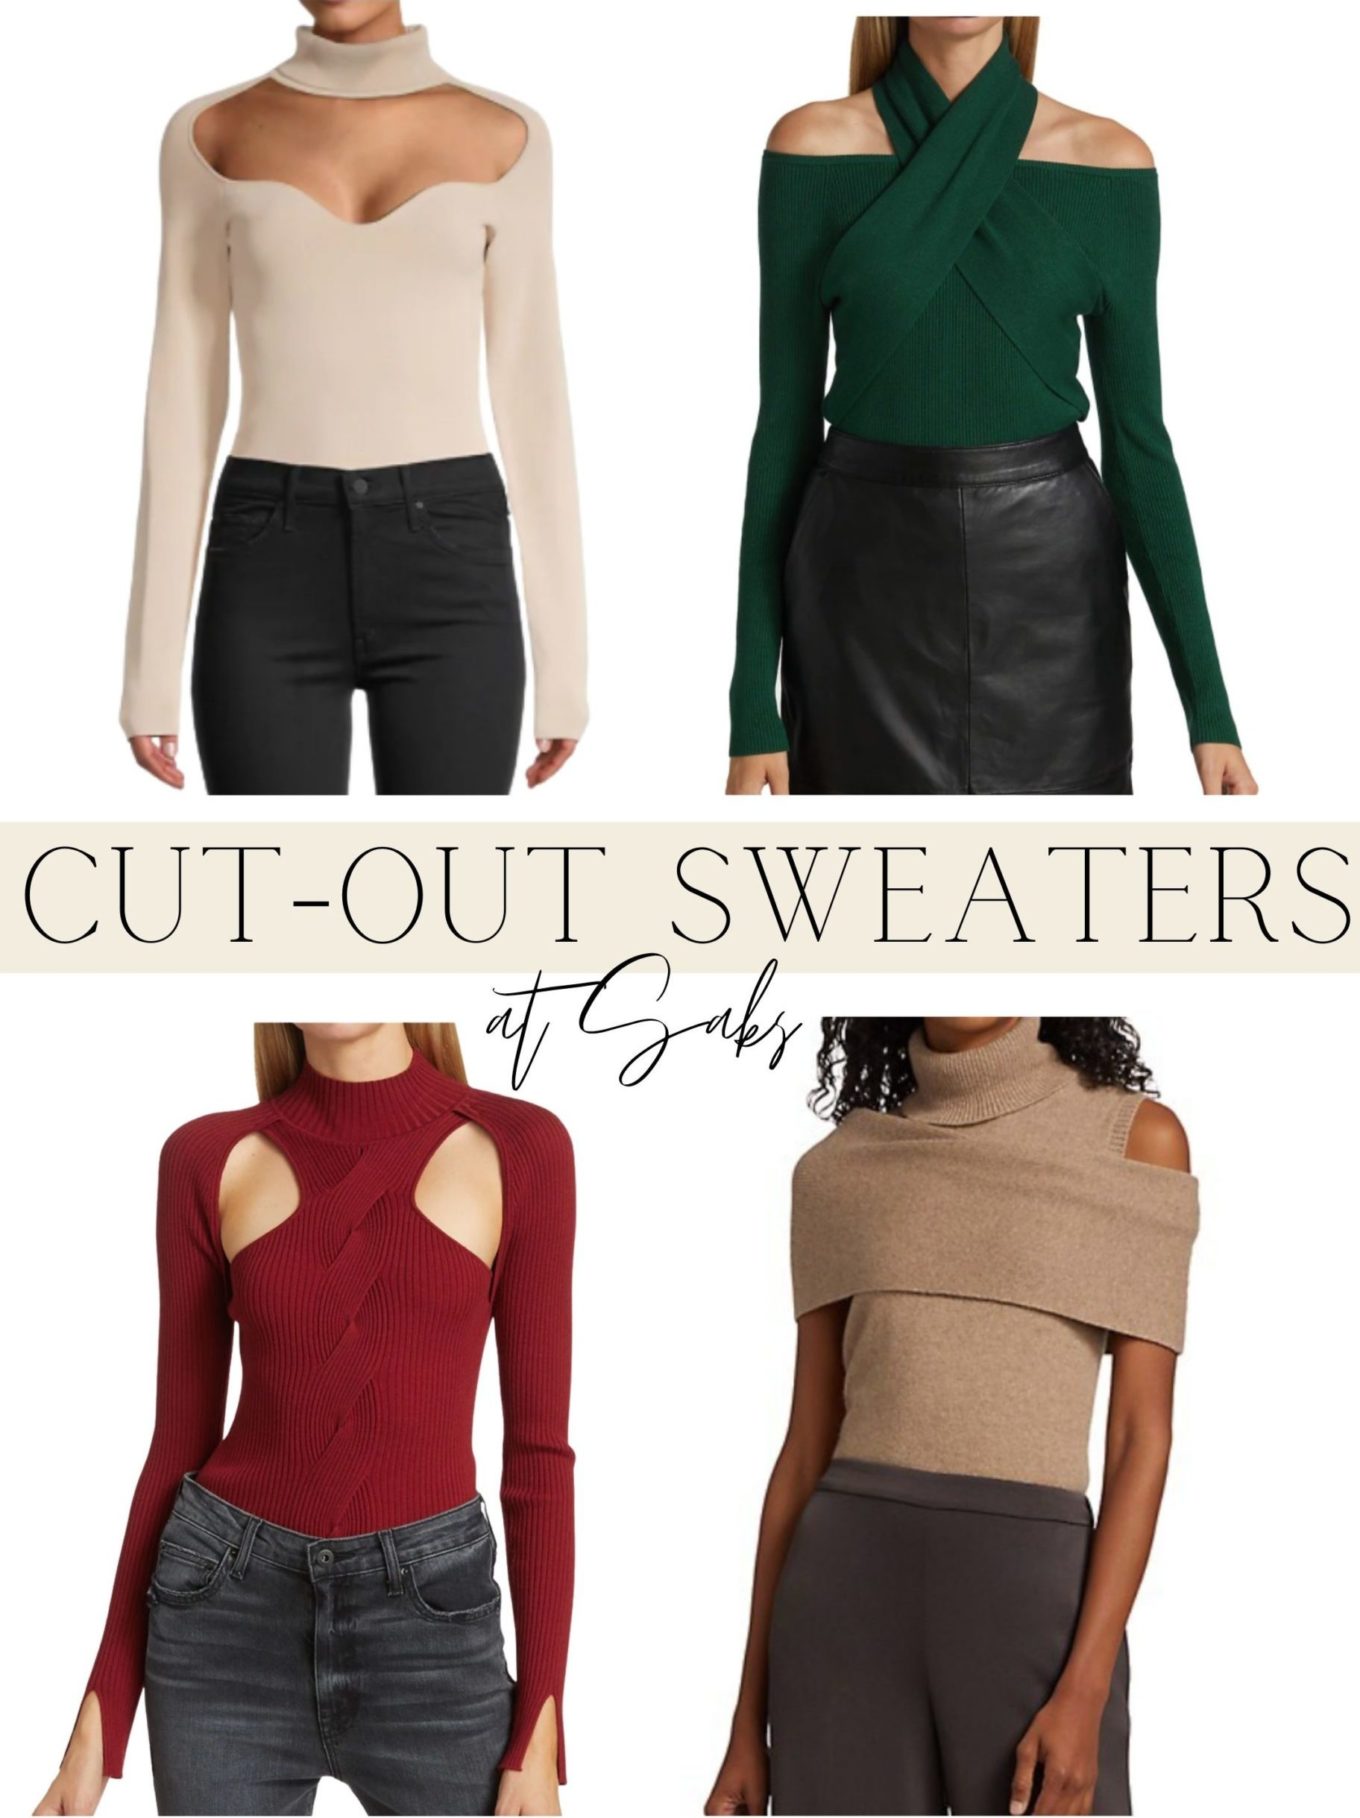 cut-out sweaters